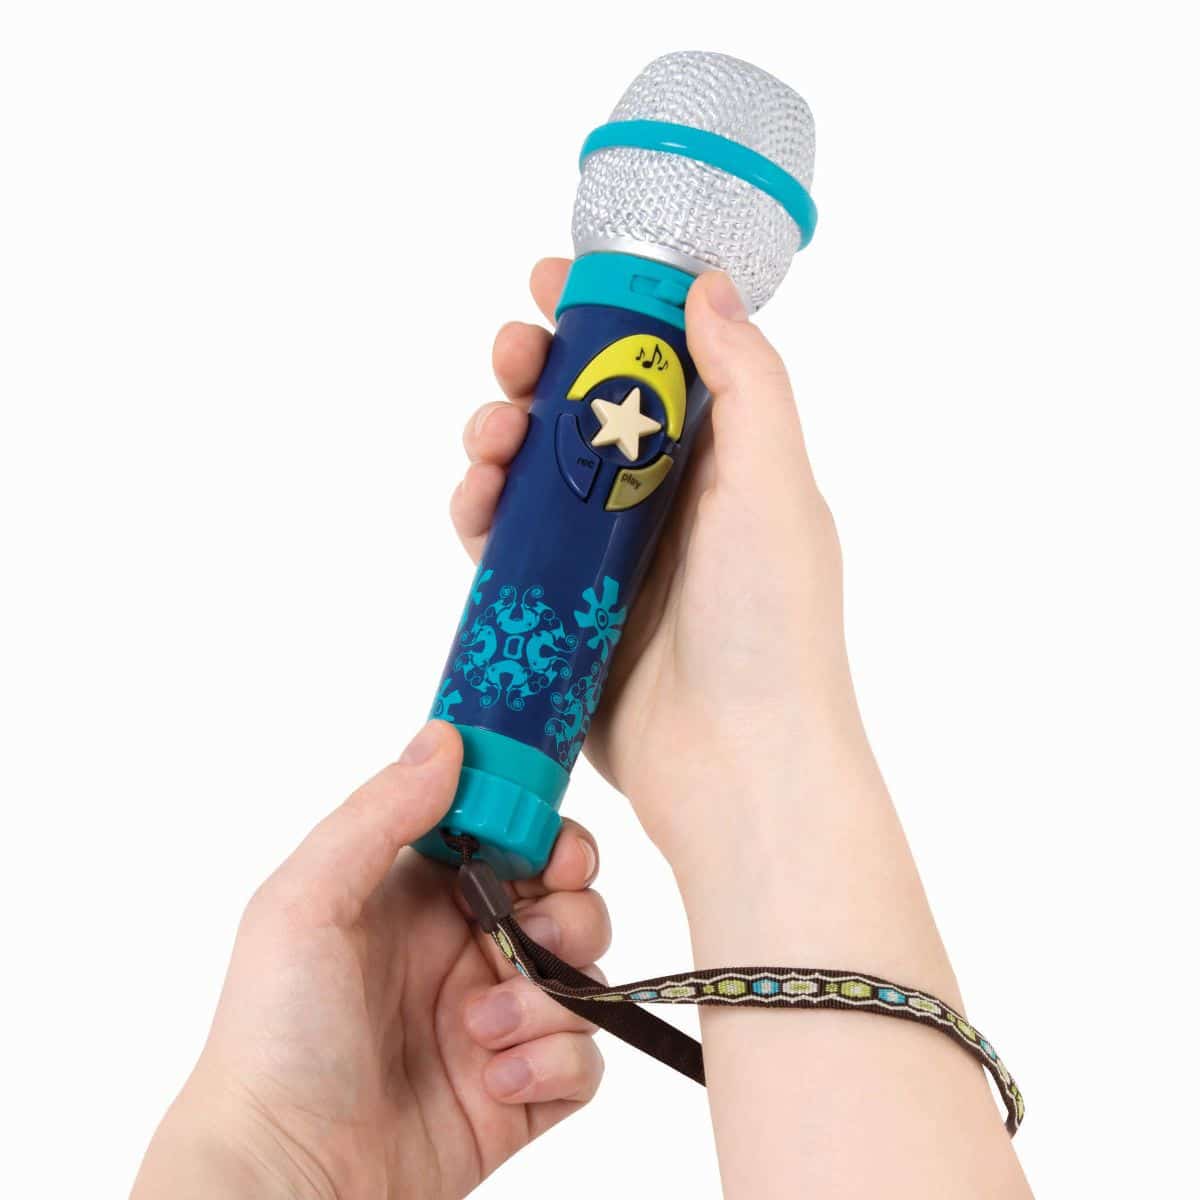 Toy karaoke microphone with strap